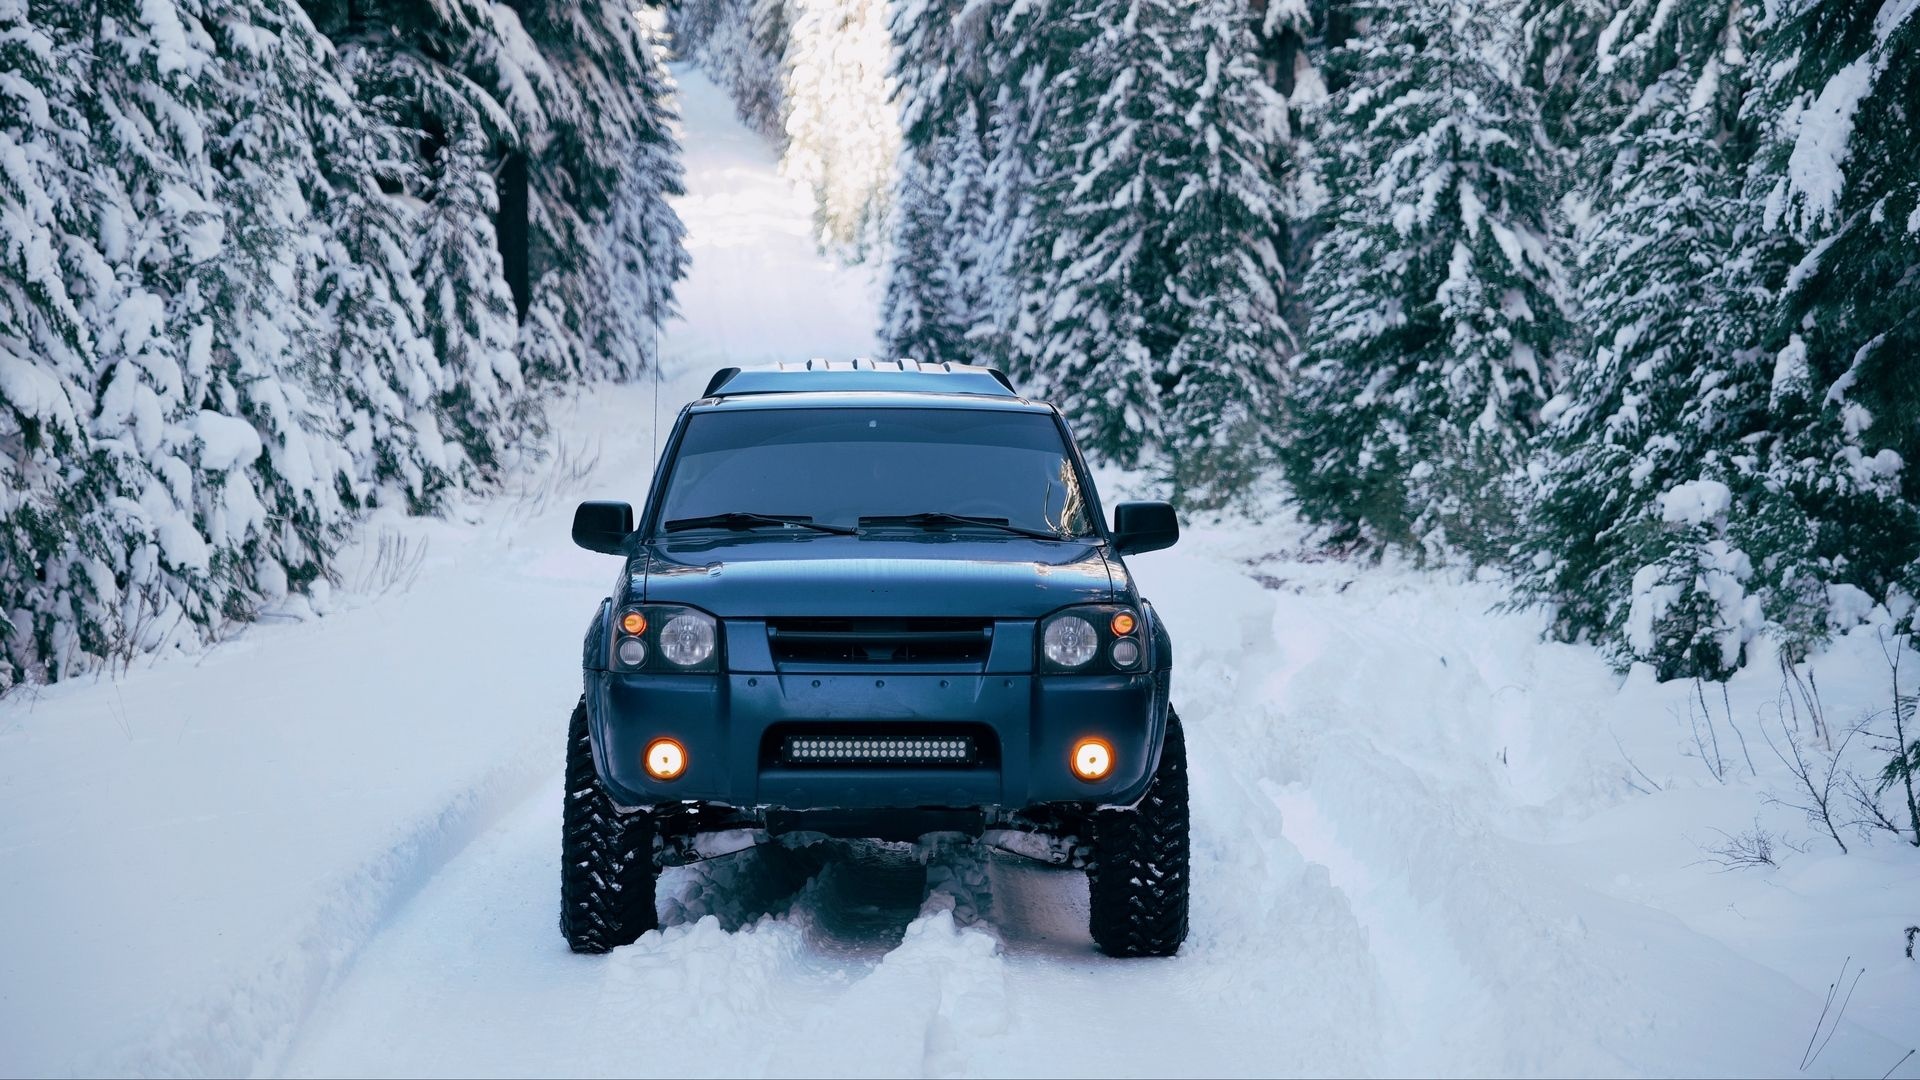 Off-road Driving: Off-road snow and ice driving, 4-wheel drive system, Dedicated snow tires. 1920x1080 Full HD Wallpaper.